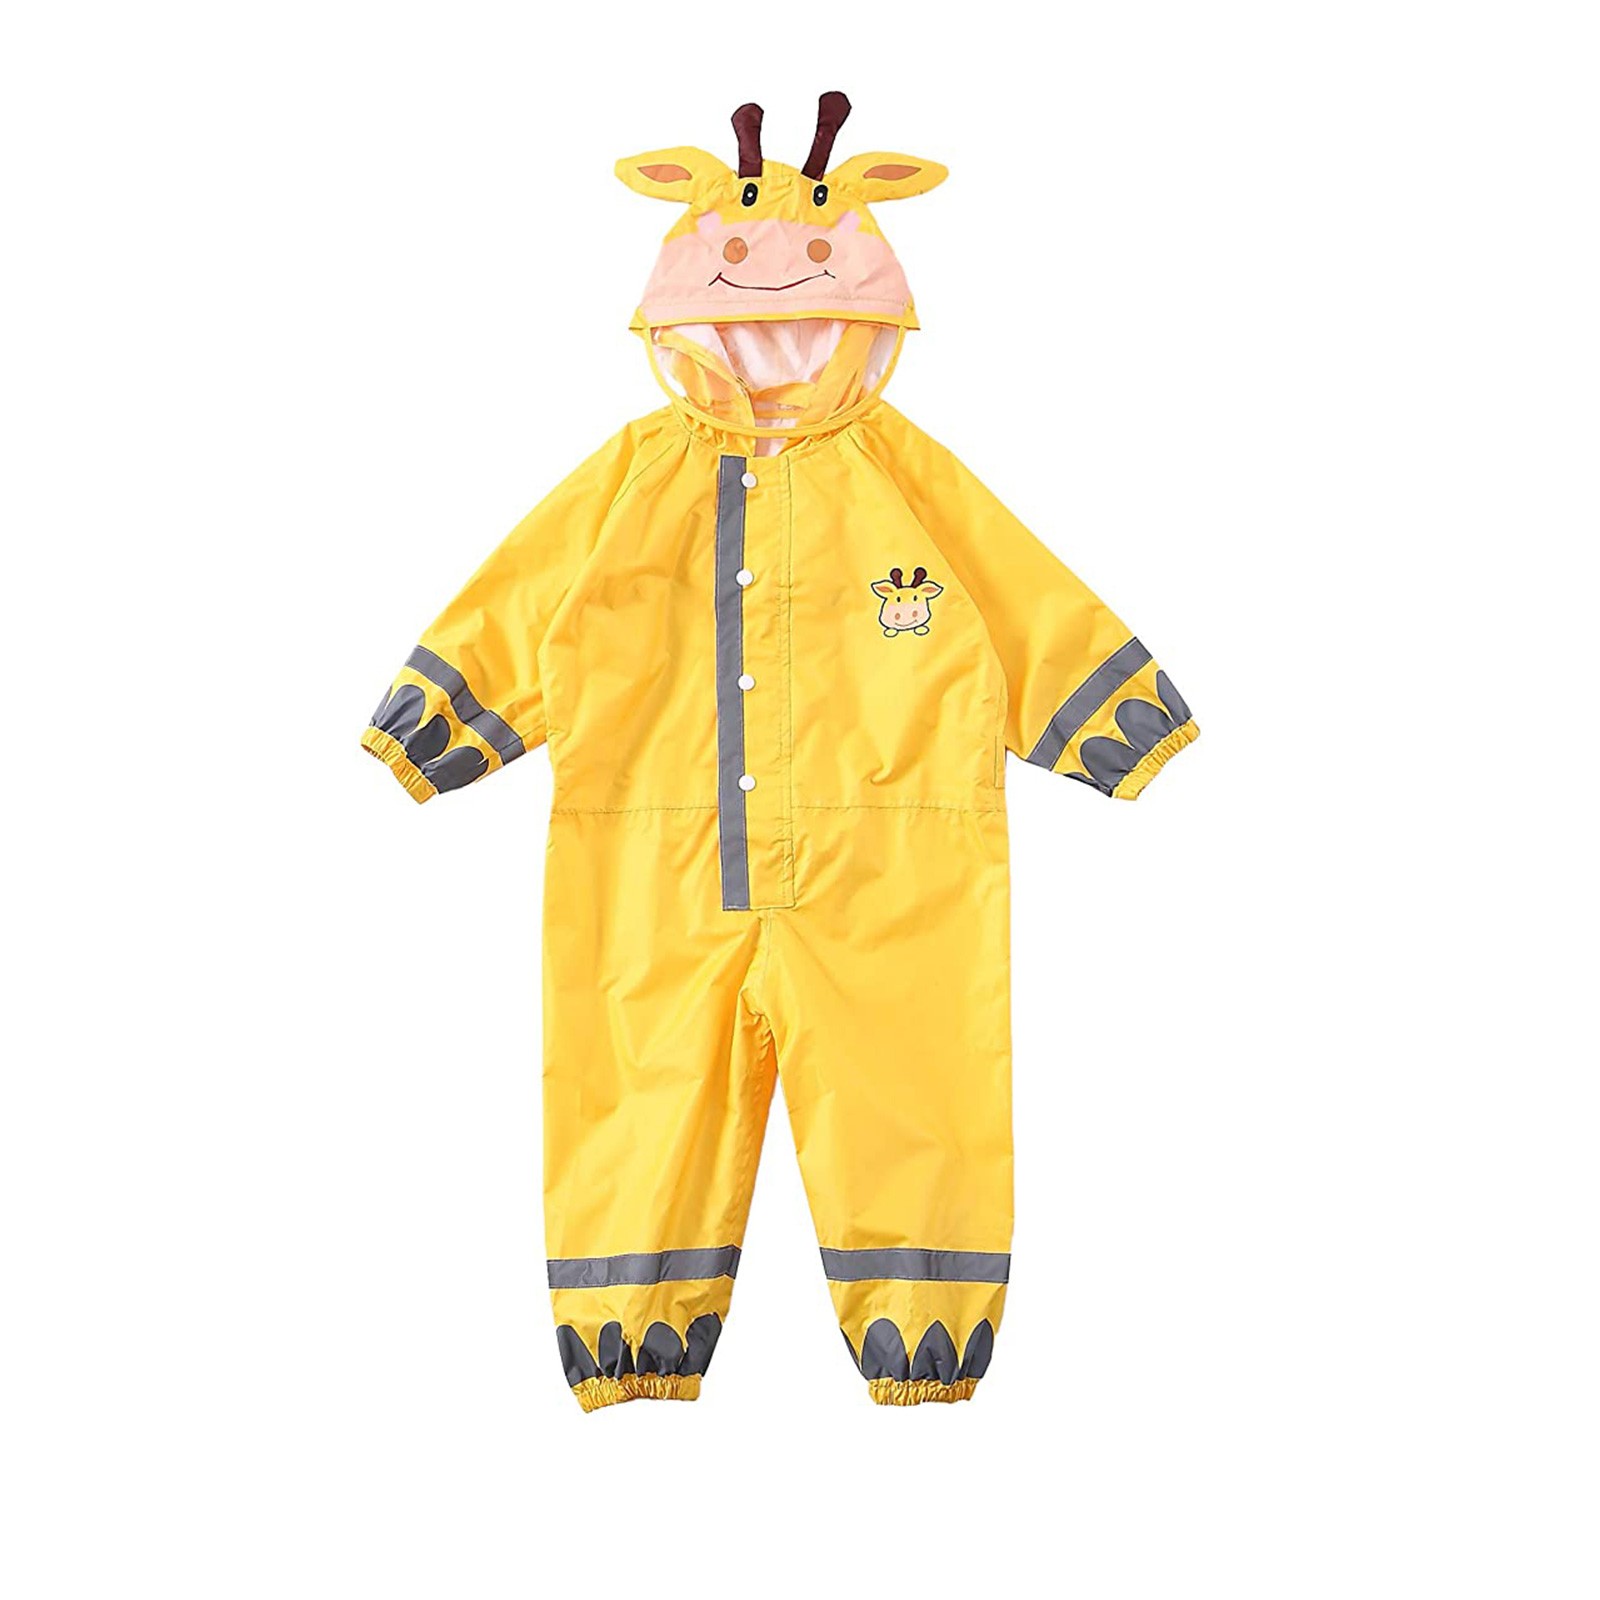 Children's Rain-Proof and Breathable Hooded Raincoat With Reflector ...